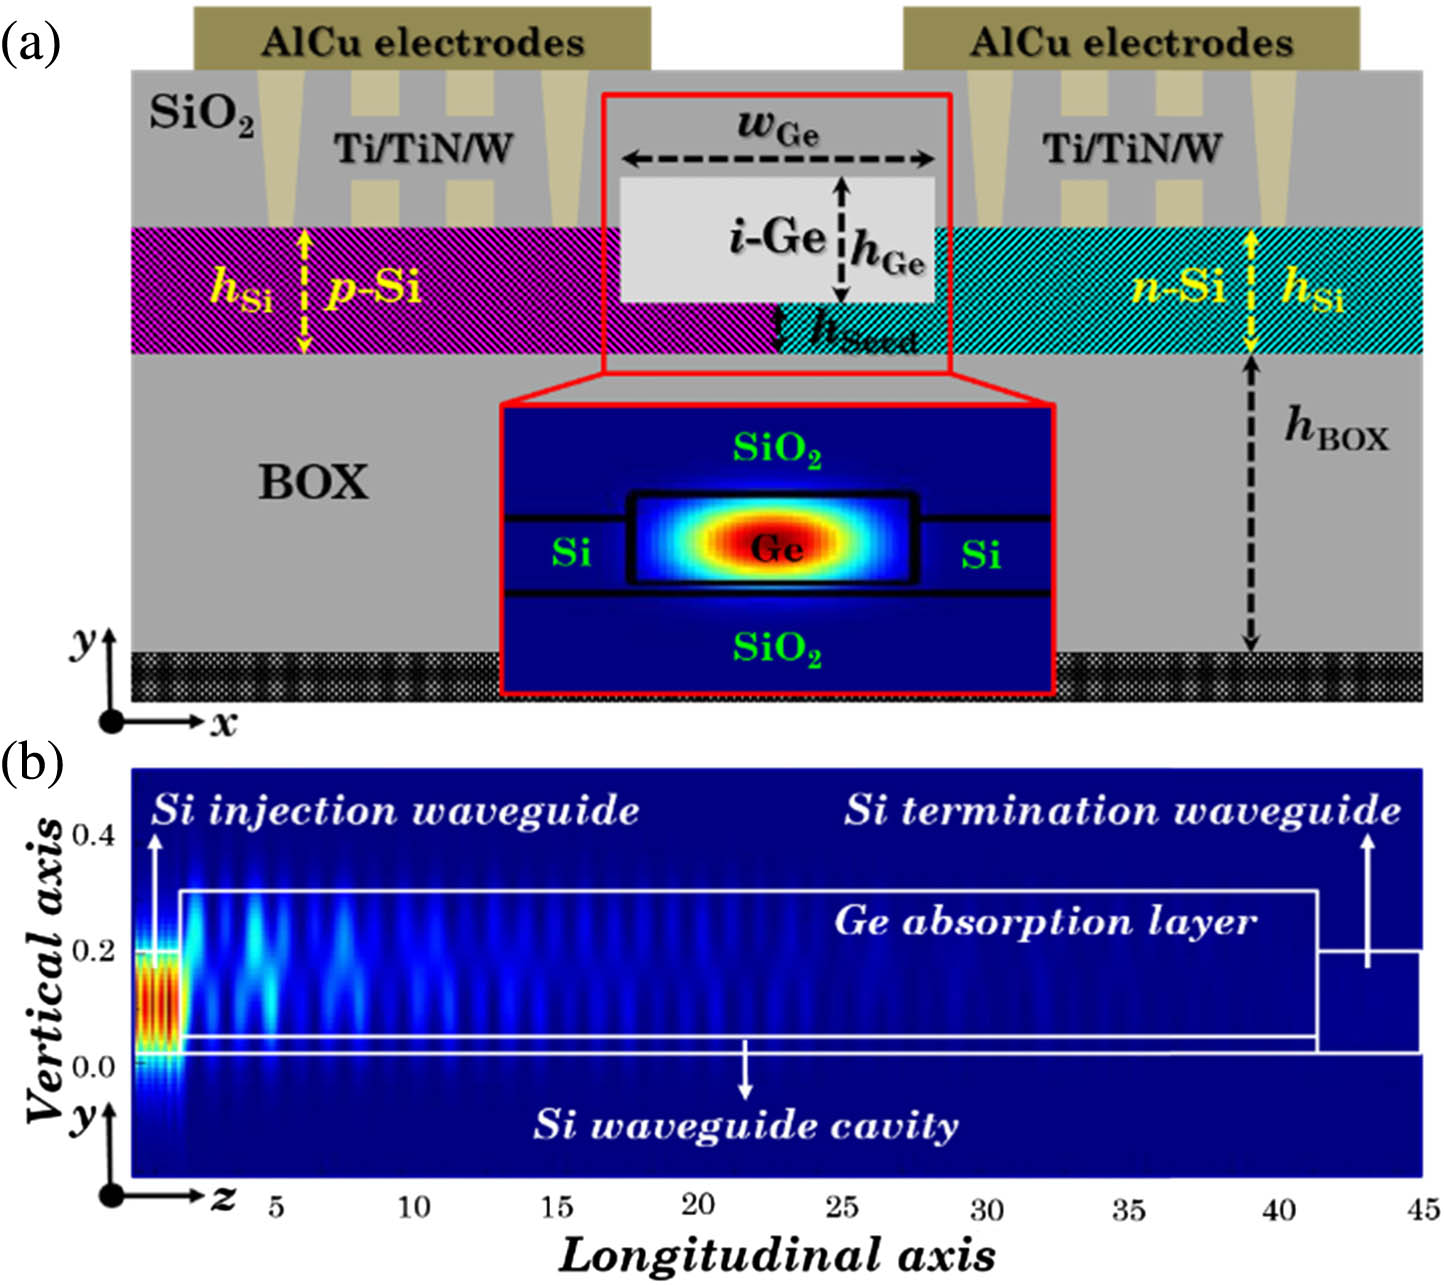 (a) Transversal schematics (x-y plane) of the pin photodetector with a lateral Si-Ge-Si heterojunction architecture. Inset: electric field profile of the fundamental TE-polarized optical mode in a 0.260-μm-thick and 1-μm-wide hetero-structured photodetector. (b) Longitudinal view (y-z plane) of the optical intensity distribution in the 1-μm-wide and 40-μm-long butt-waveguide-coupled pin Si-Ge-Si photodetector, as obtained from 3D FDTD simulations. The fundamental TE mode is injected from the Si waveguide on the left-hand side.